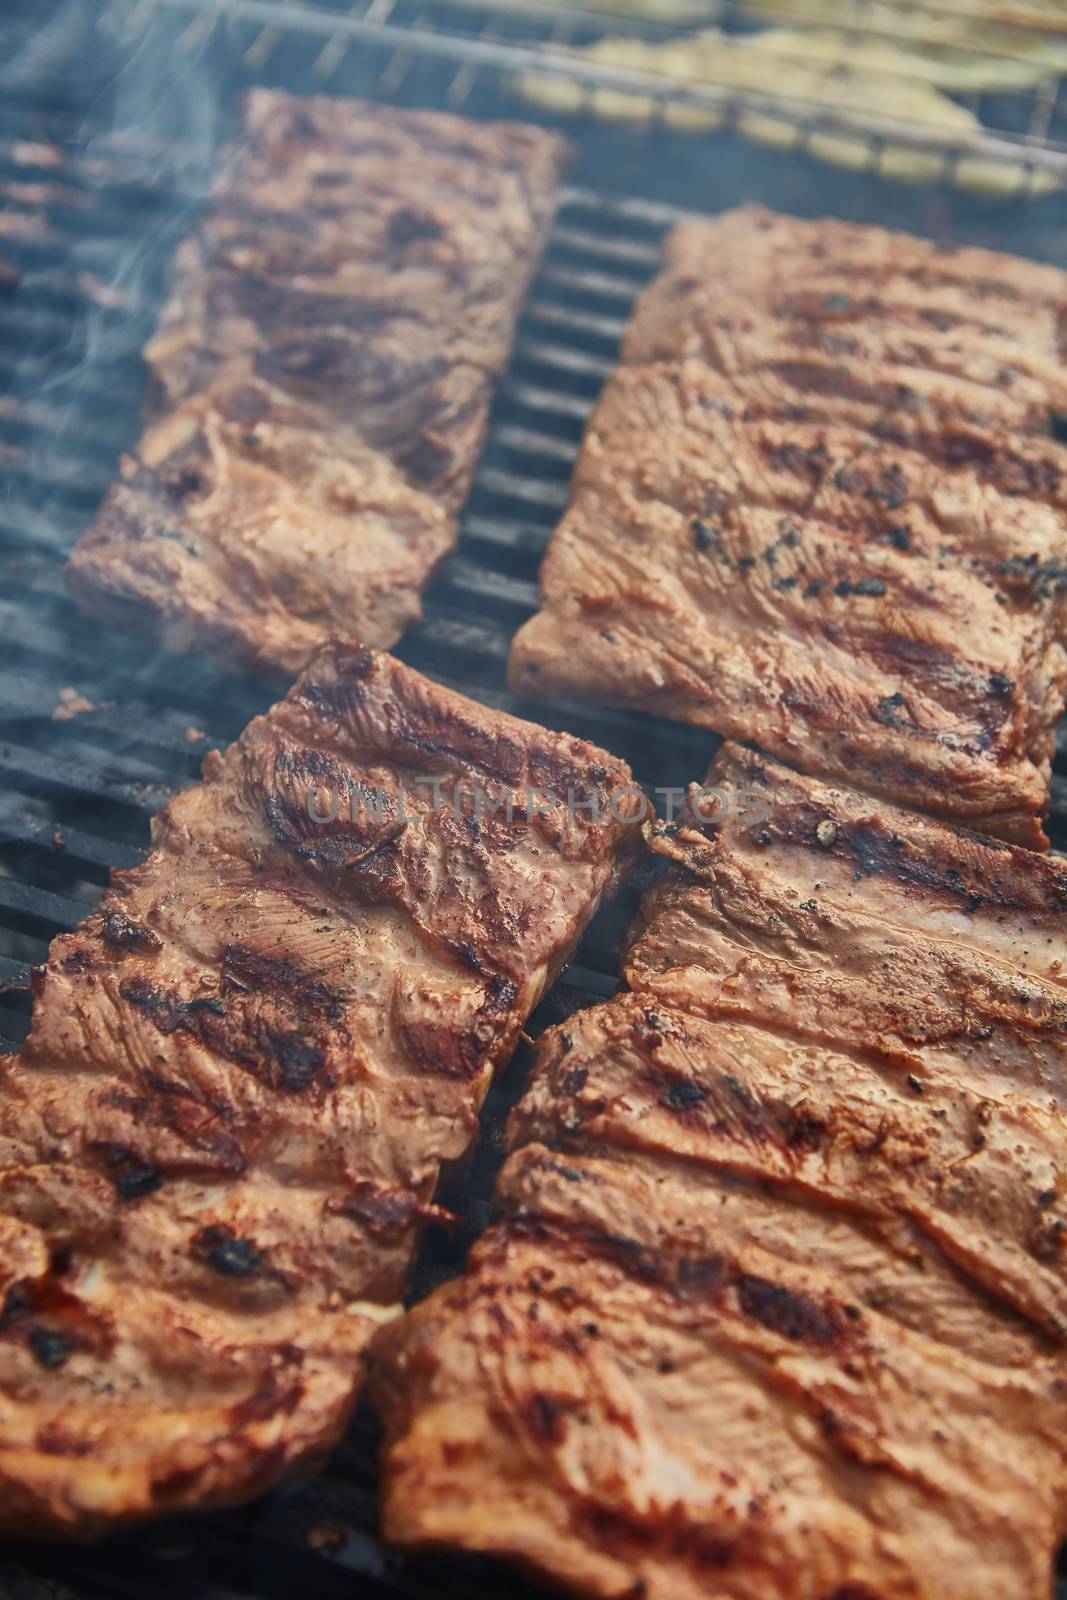 Grilled pork ribs on the grill. Shallow dof